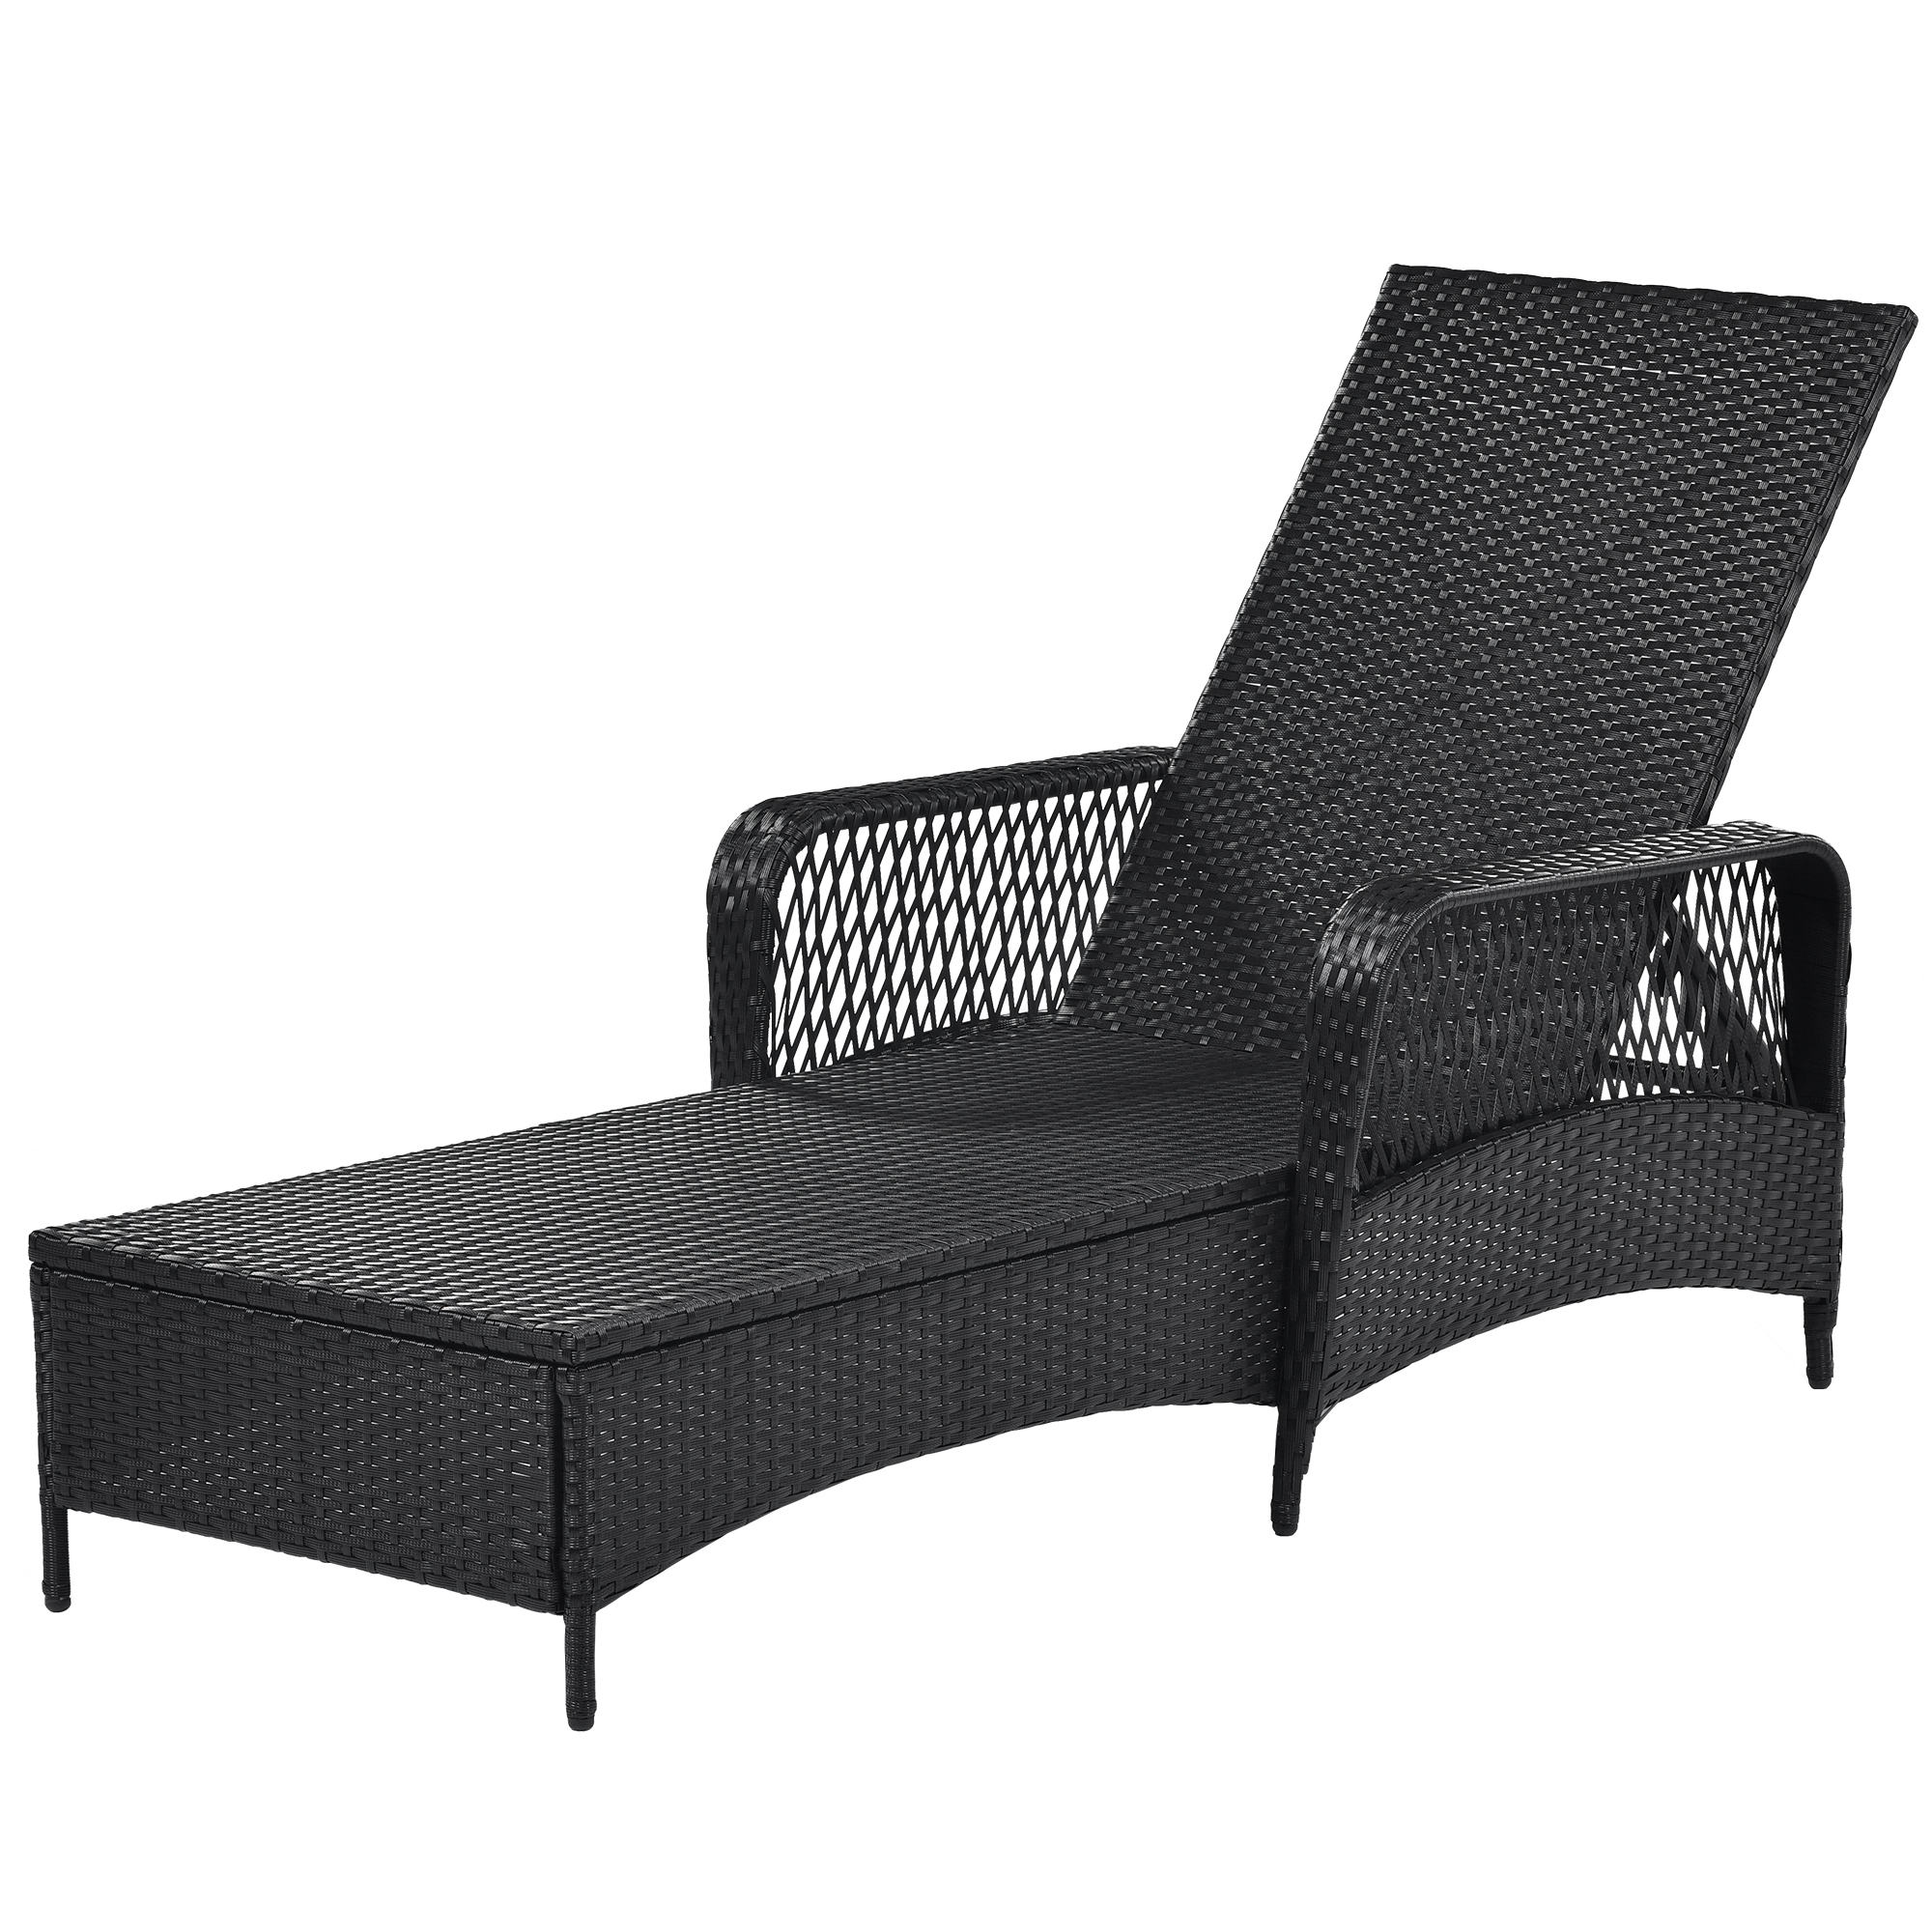 Outdoor Patio Reclining Chair Sunbed with Adjustable Backrest, Black Wicker All-Weather Chaise Lounge Chair for Garden Yard Patio - image 5 of 8